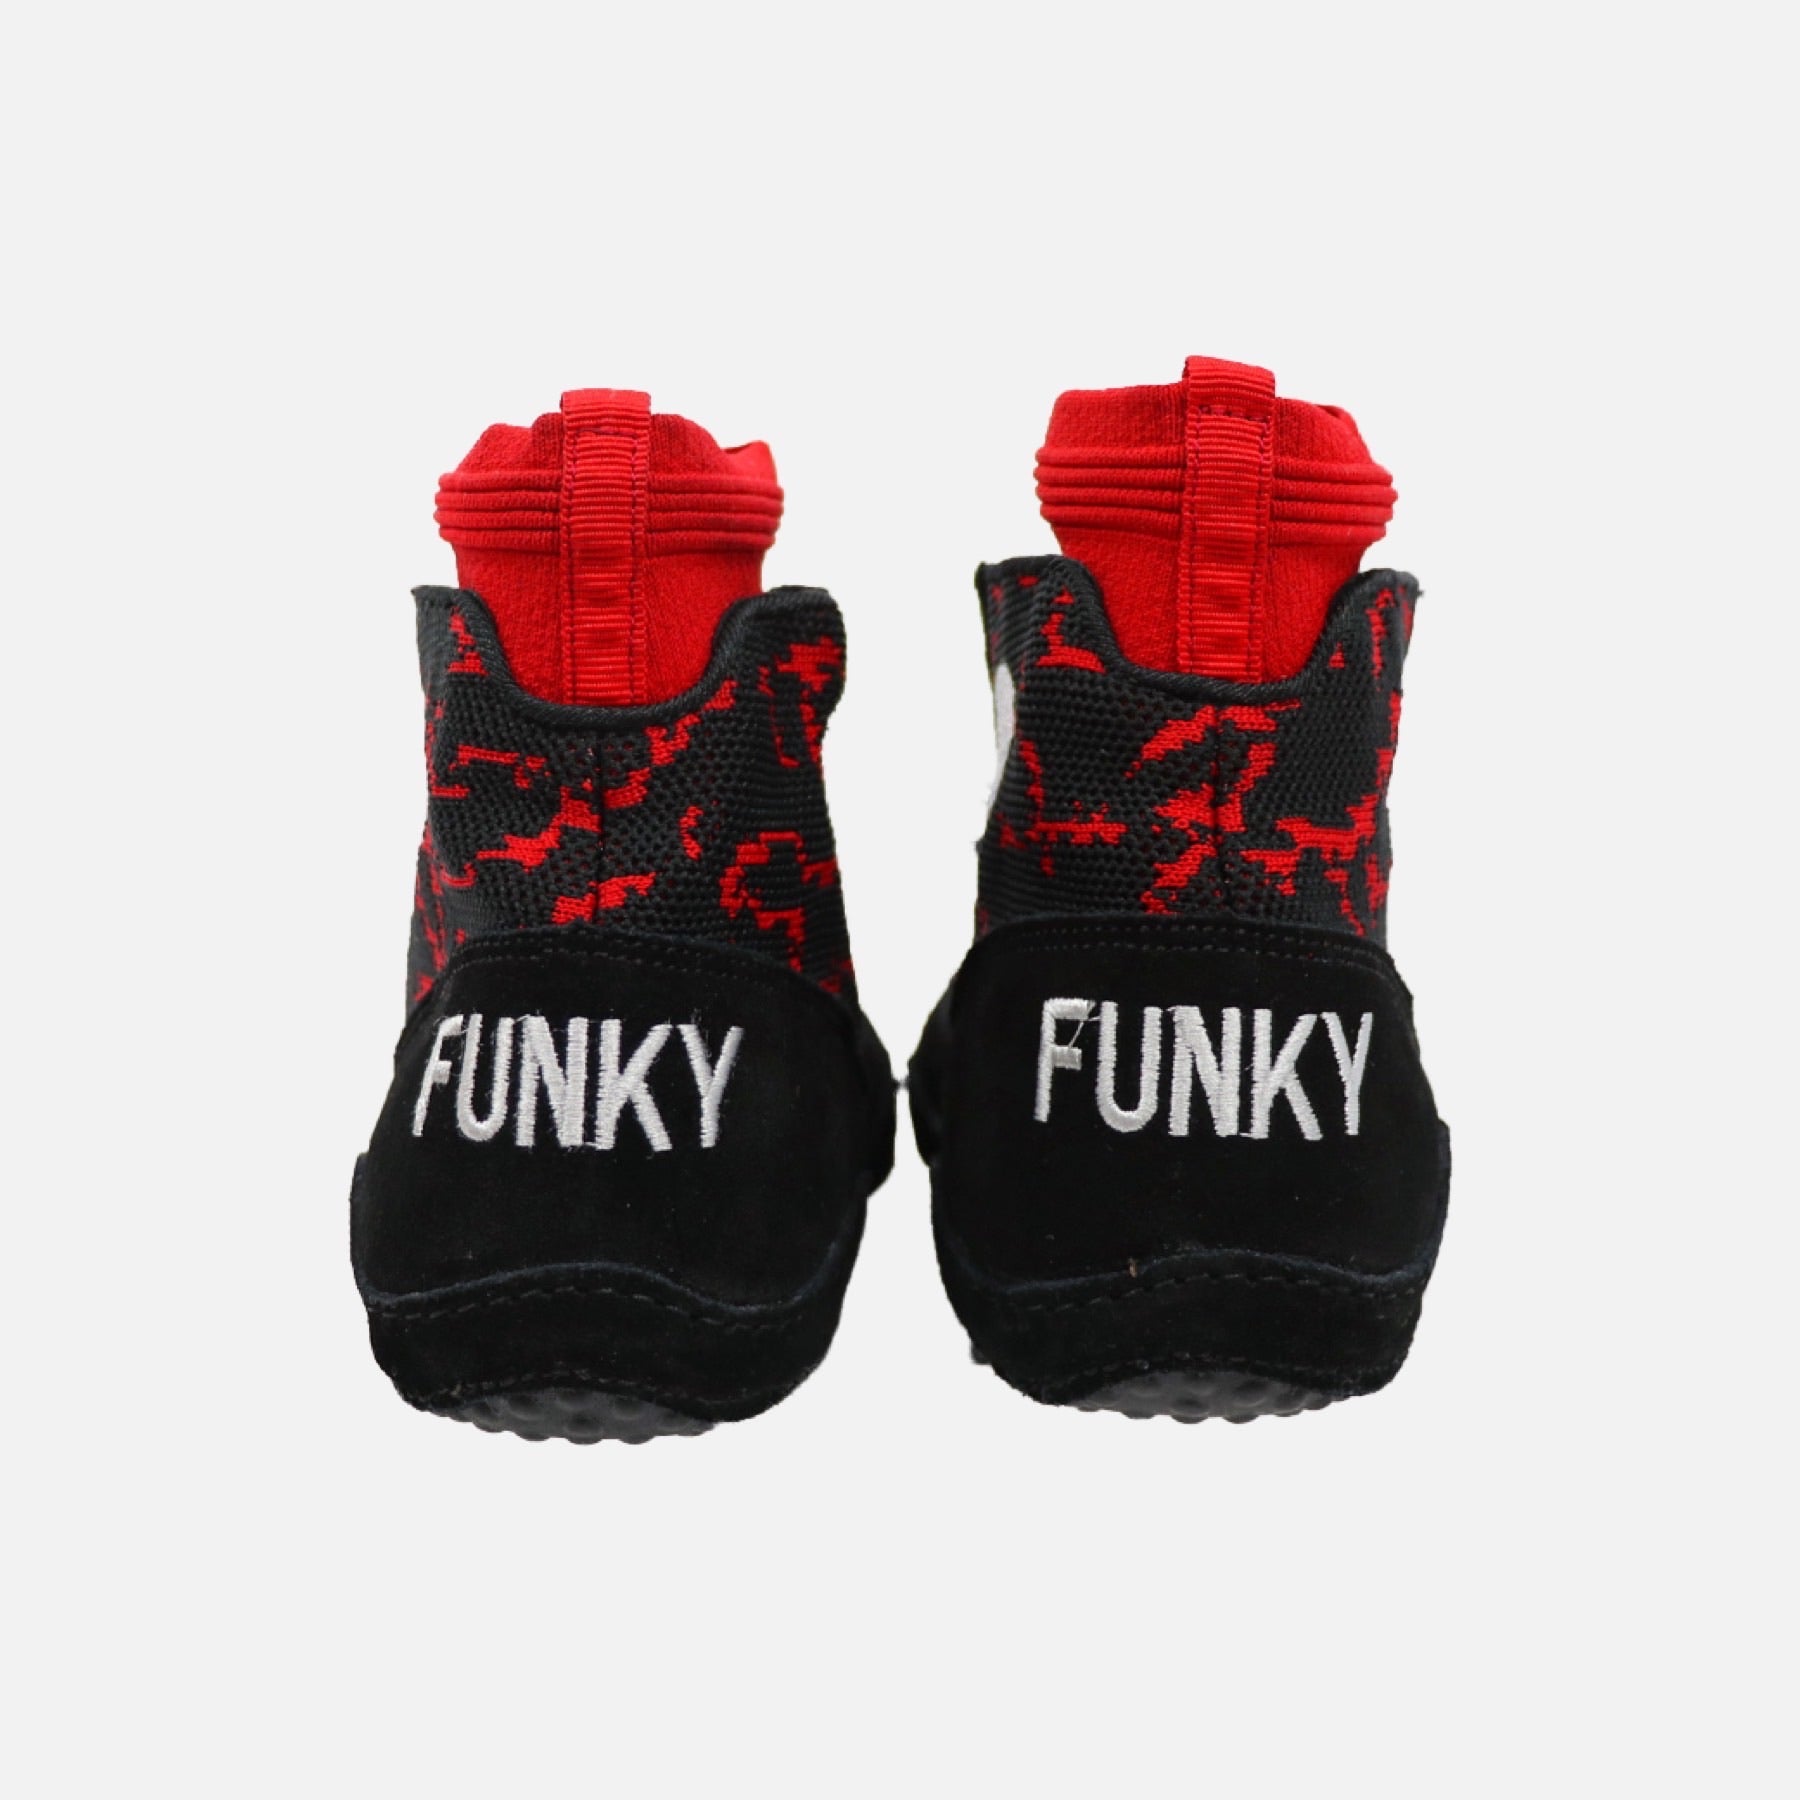 funky wrestling shoes